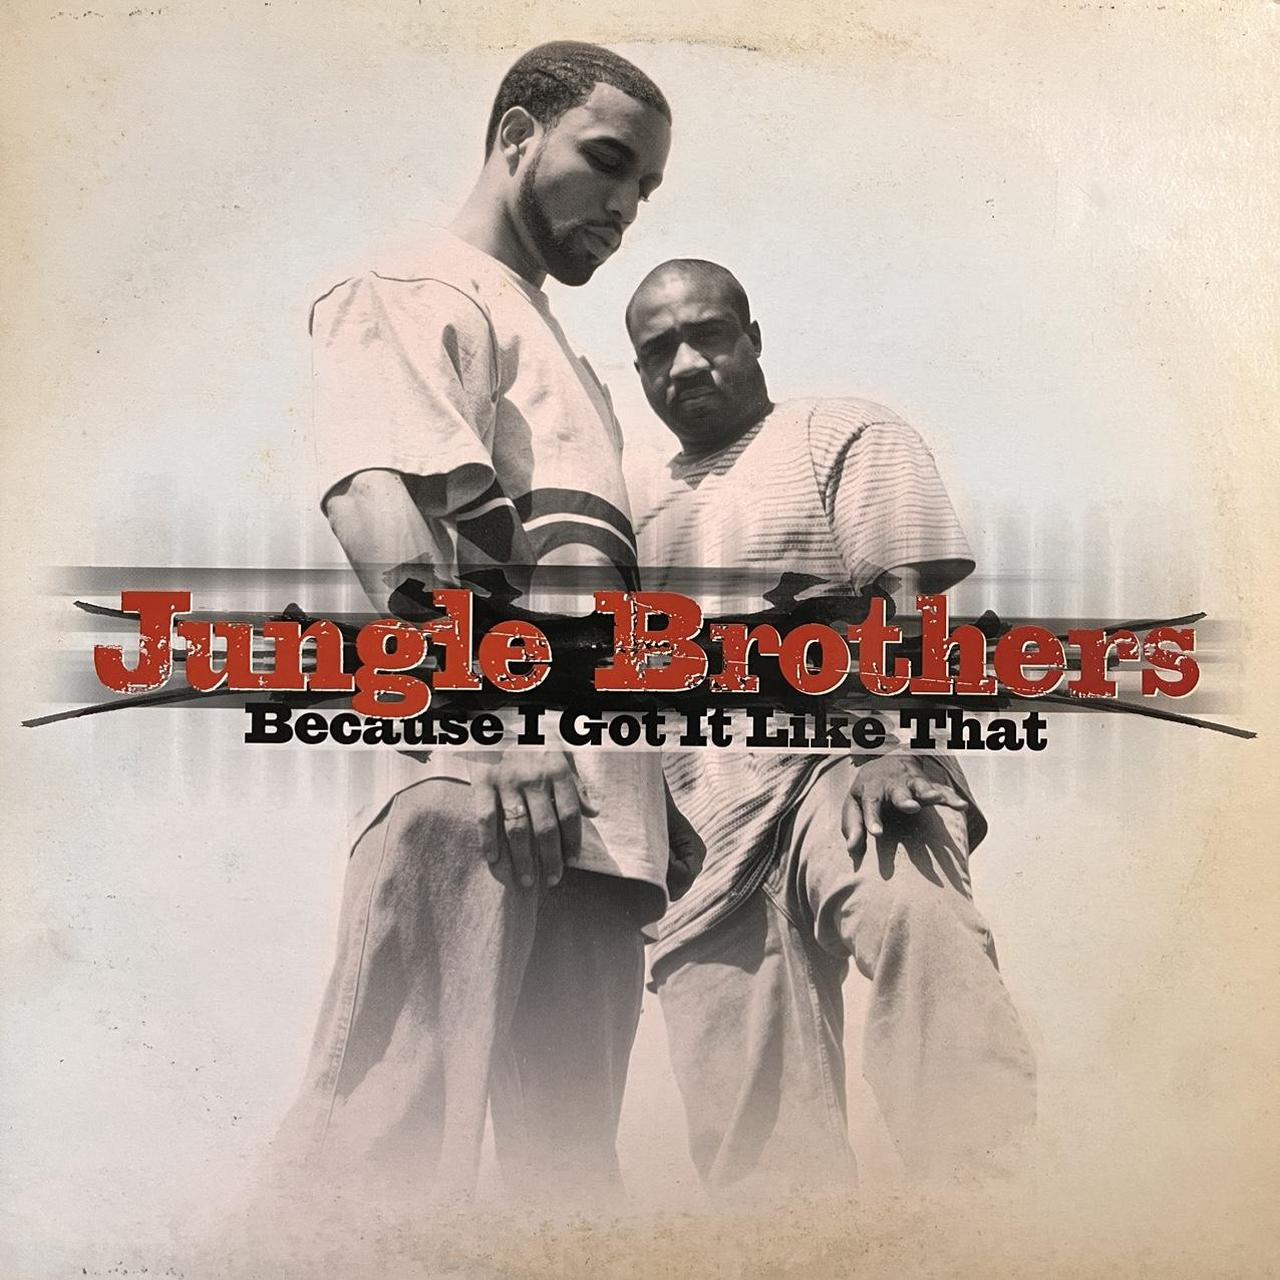 Jungle Brothers “Because I Got It like That” 4 Track 12inch Vinyl